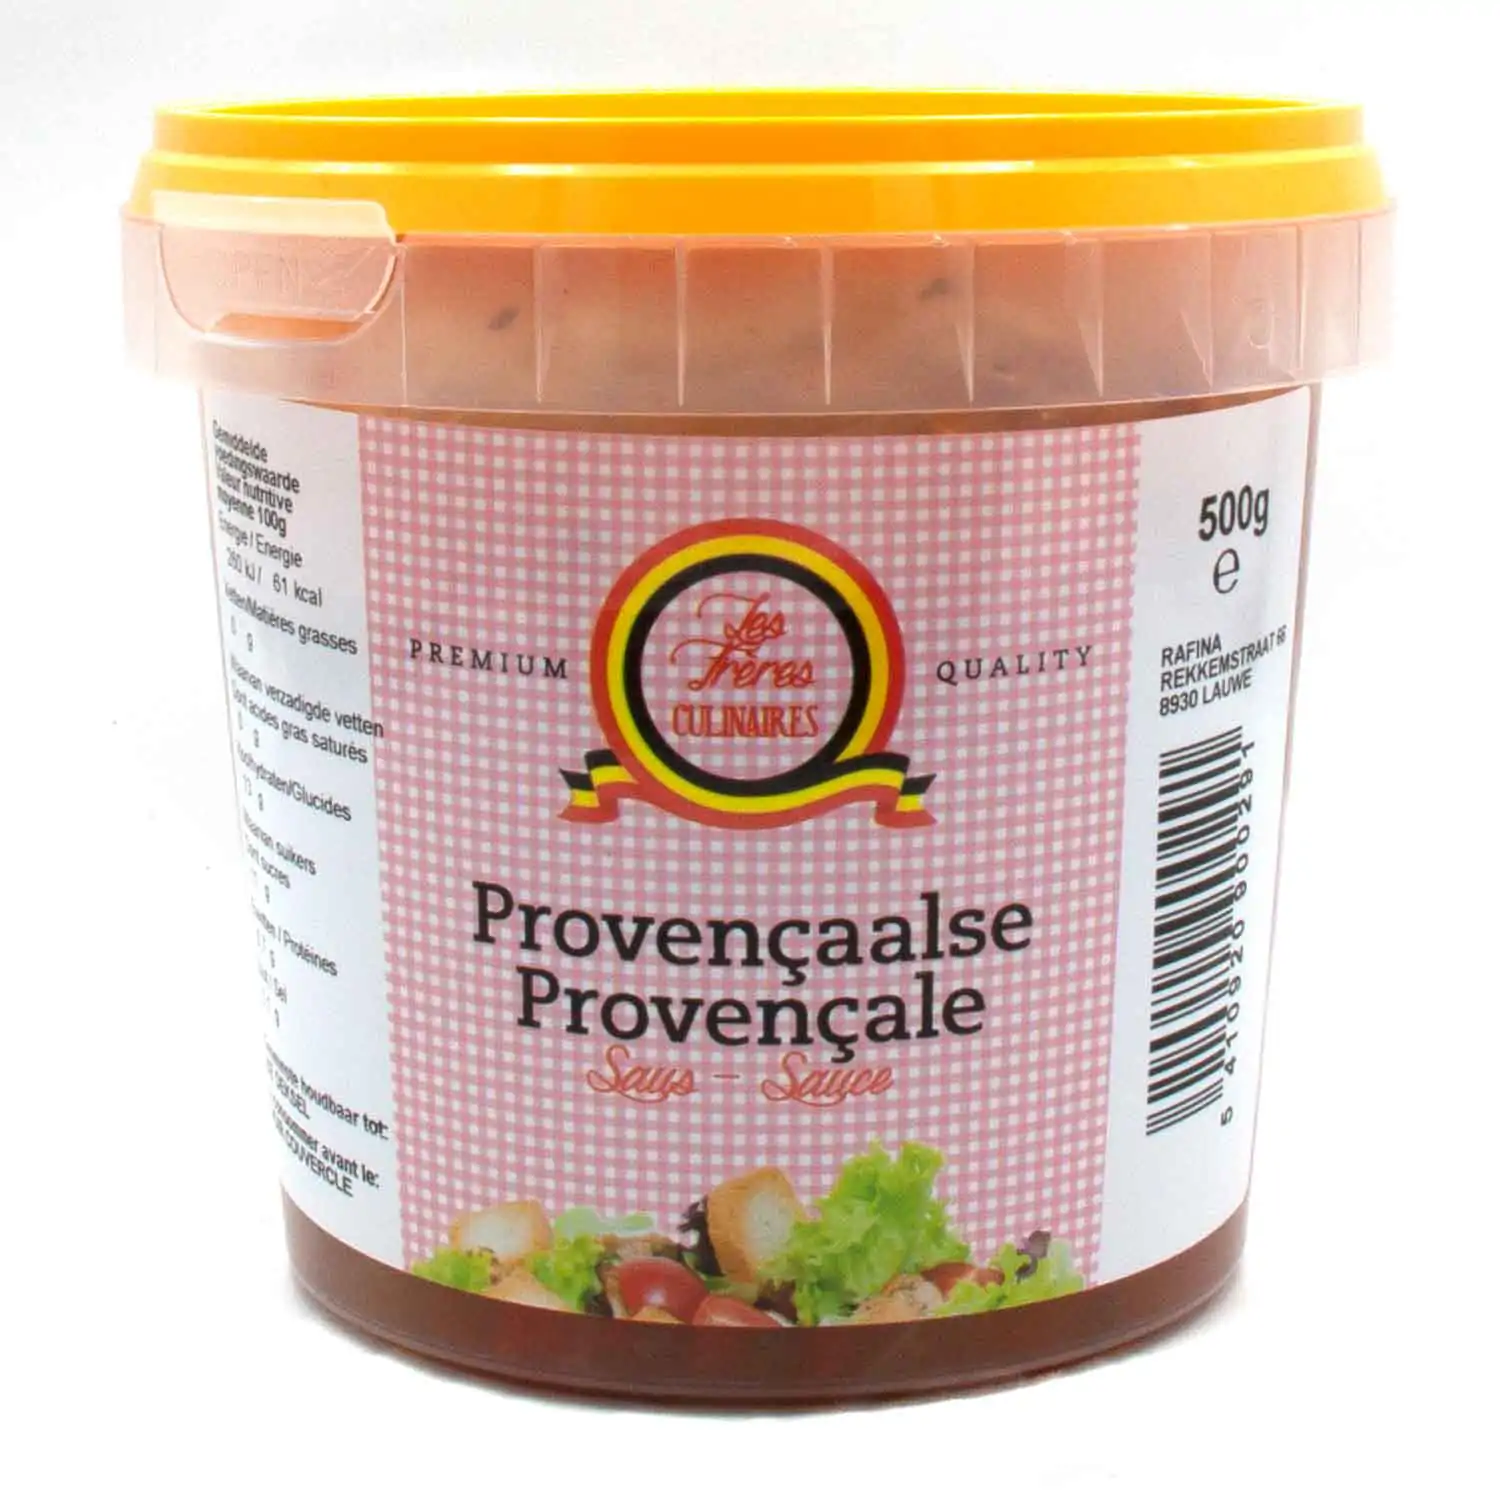 Les Frères Culinaires provençale 500g - Buy at Real Tobacco